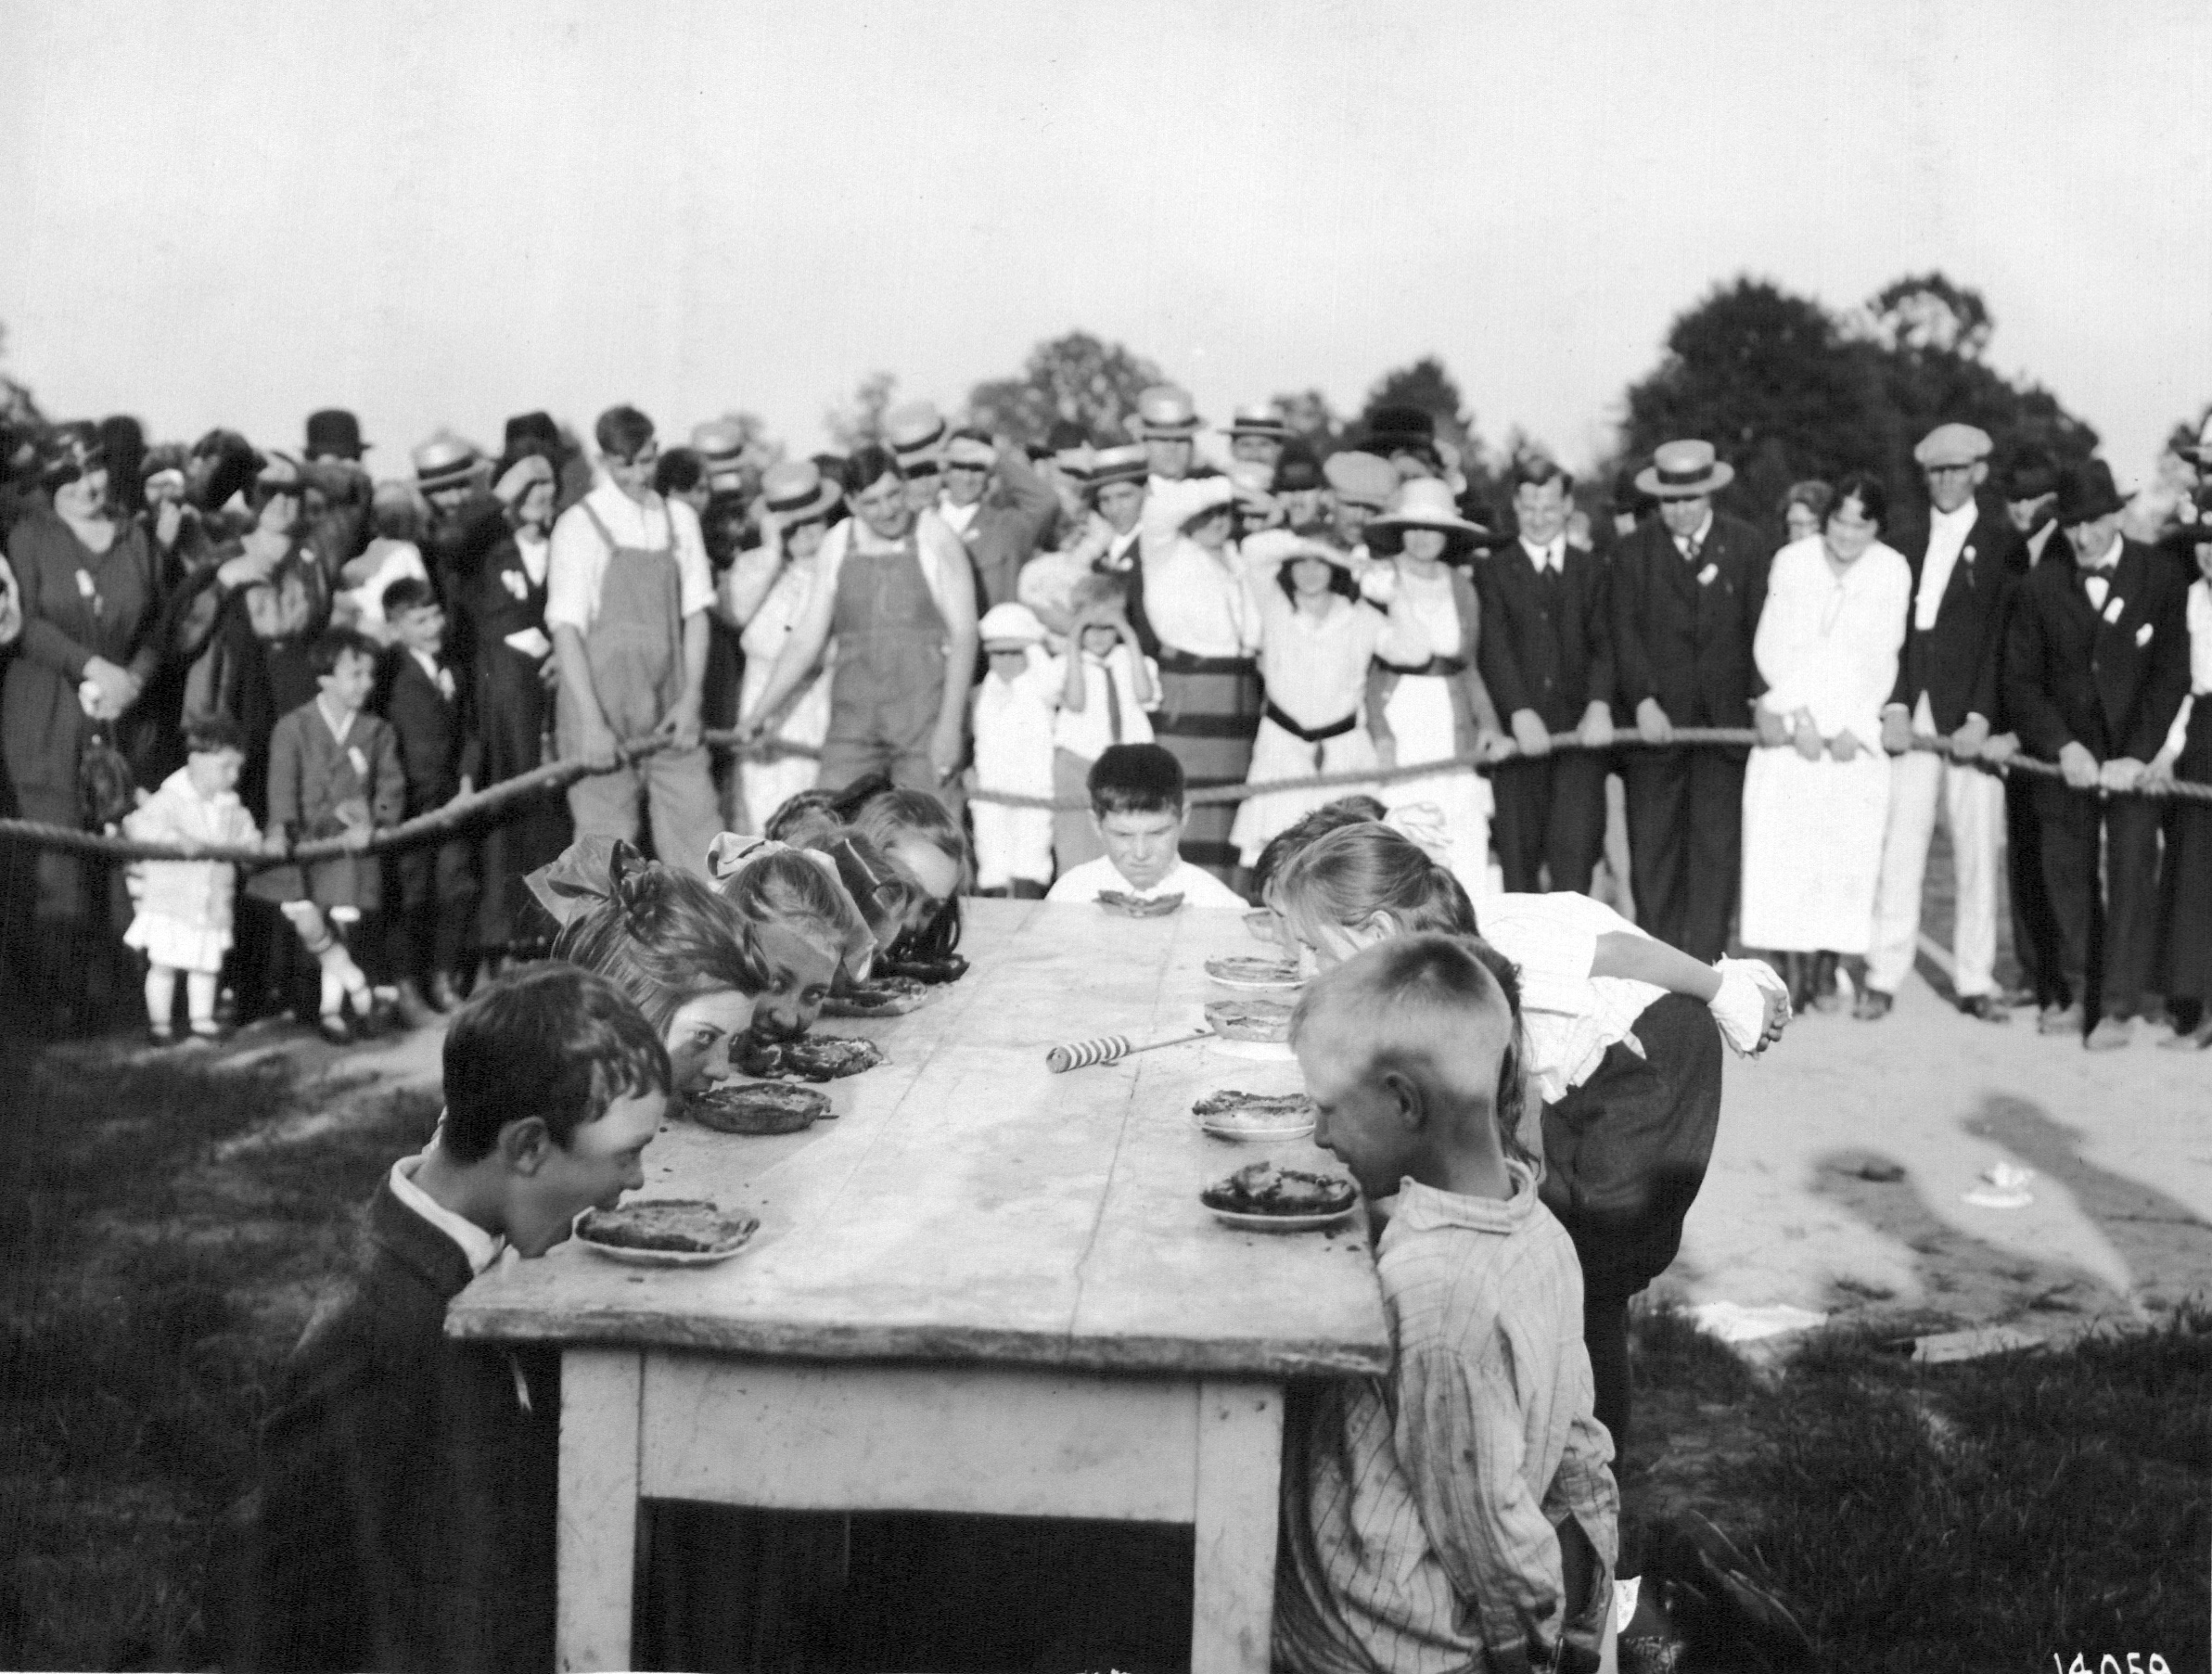 Black and white image of children lined up at a table, in front of an audience, for a pie eating contest.